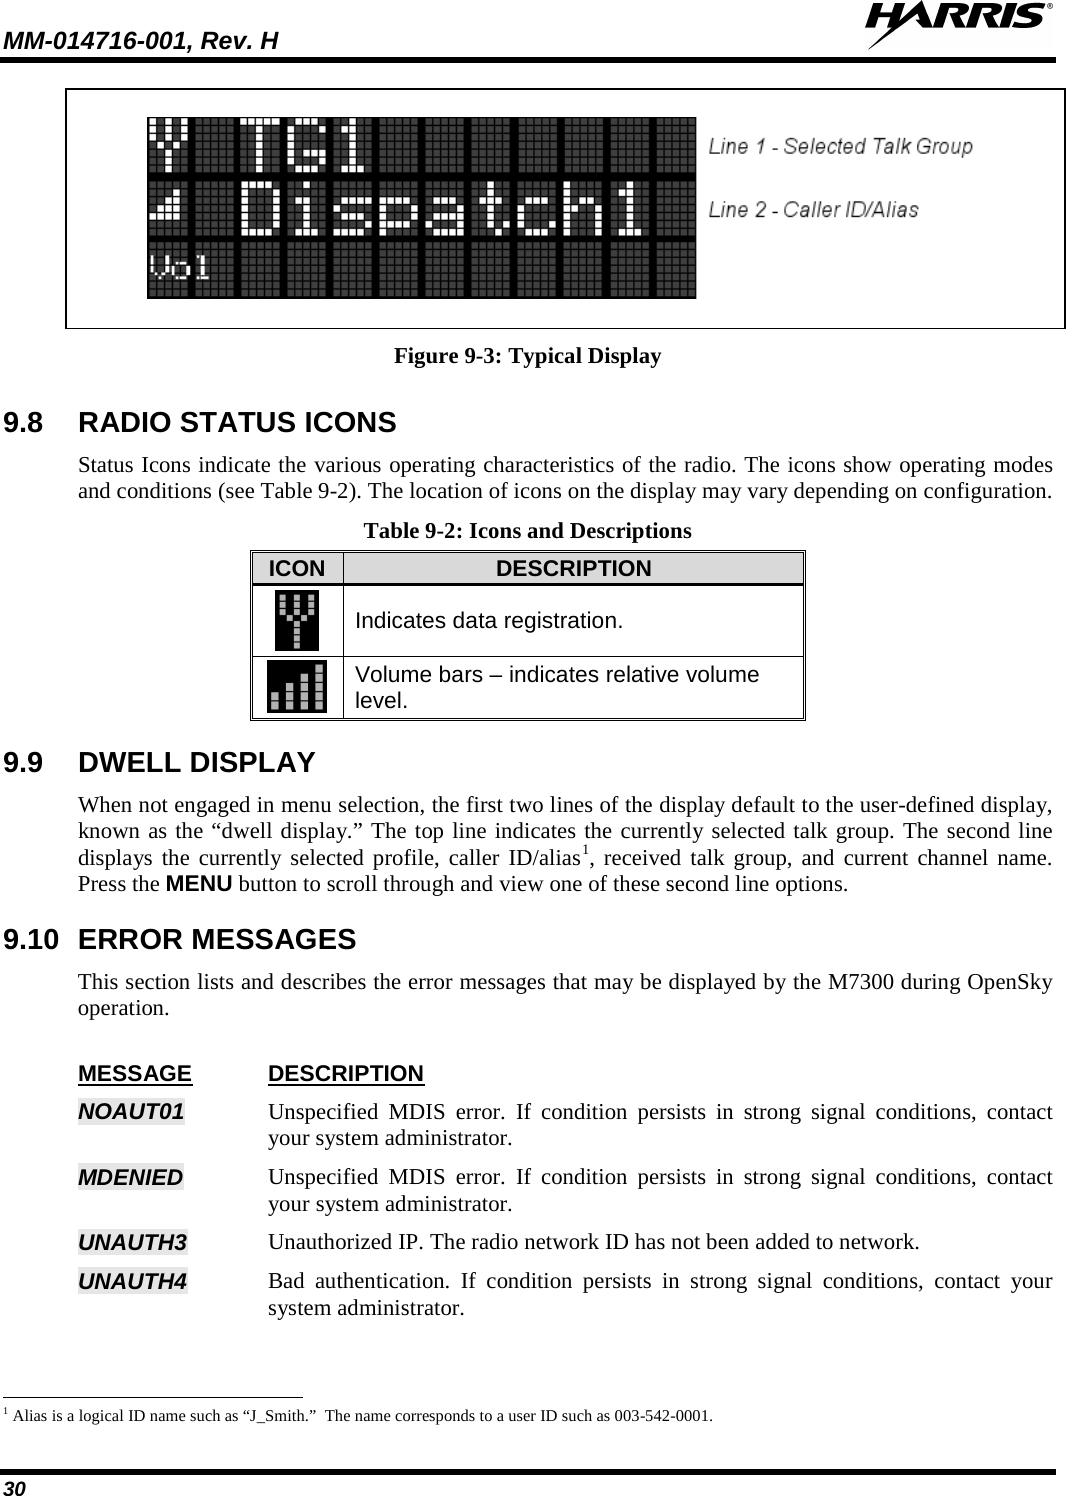 MM-014716-001, Rev. H  30    Figure 9-3: Typical Display 9.8 RADIO STATUS ICONS Status Icons indicate the various operating characteristics of the radio. The icons show operating modes and conditions (see Table 9-2). The location of icons on the display may vary depending on configuration. Table 9-2: Icons and Descriptions ICON DESCRIPTION  Indicates data registration.  Volume bars – indicates relative volume level. 9.9 DWELL DISPLAY When not engaged in menu selection, the first two lines of the display default to the user-defined display, known as the “dwell display.” The top line indicates the currently selected talk group. The second line displays the currently selected profile, caller ID/alias19.10 ERROR MESSAGES , received talk group, and current channel name. Press the MENU button to scroll through and view one of these second line options.  This section lists and describes the error messages that may be displayed by the M7300 during OpenSky operation.  MESSAGE DESCRIPTION NOAUT01 Unspecified MDIS error. If condition persists in strong signal conditions, contact your system administrator. MDENIED  Unspecified MDIS error. If condition persists in strong signal conditions, contact your system administrator. UNAUTH3 Unauthorized IP. The radio network ID has not been added to network. UNAUTH4 Bad authentication. If condition persists in strong signal conditions, contact your system administrator.                                                            1 Alias is a logical ID name such as “J_Smith.”  The name corresponds to a user ID such as 003-542-0001. 